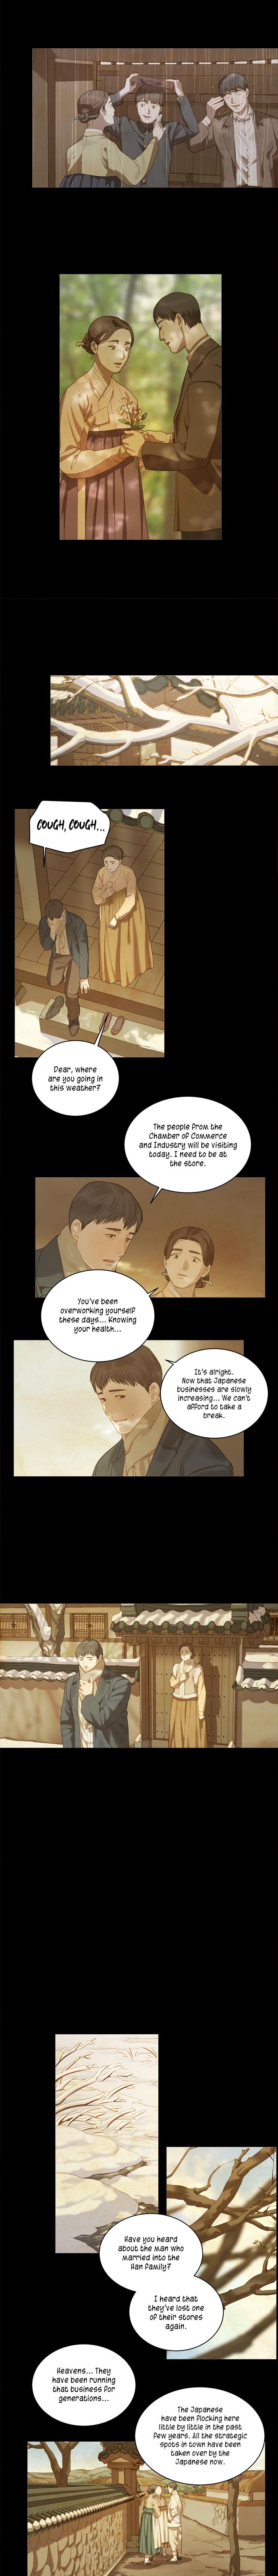 Gorae Byul - The Gyeongseong Mermaid - Chapter 38 Page 4